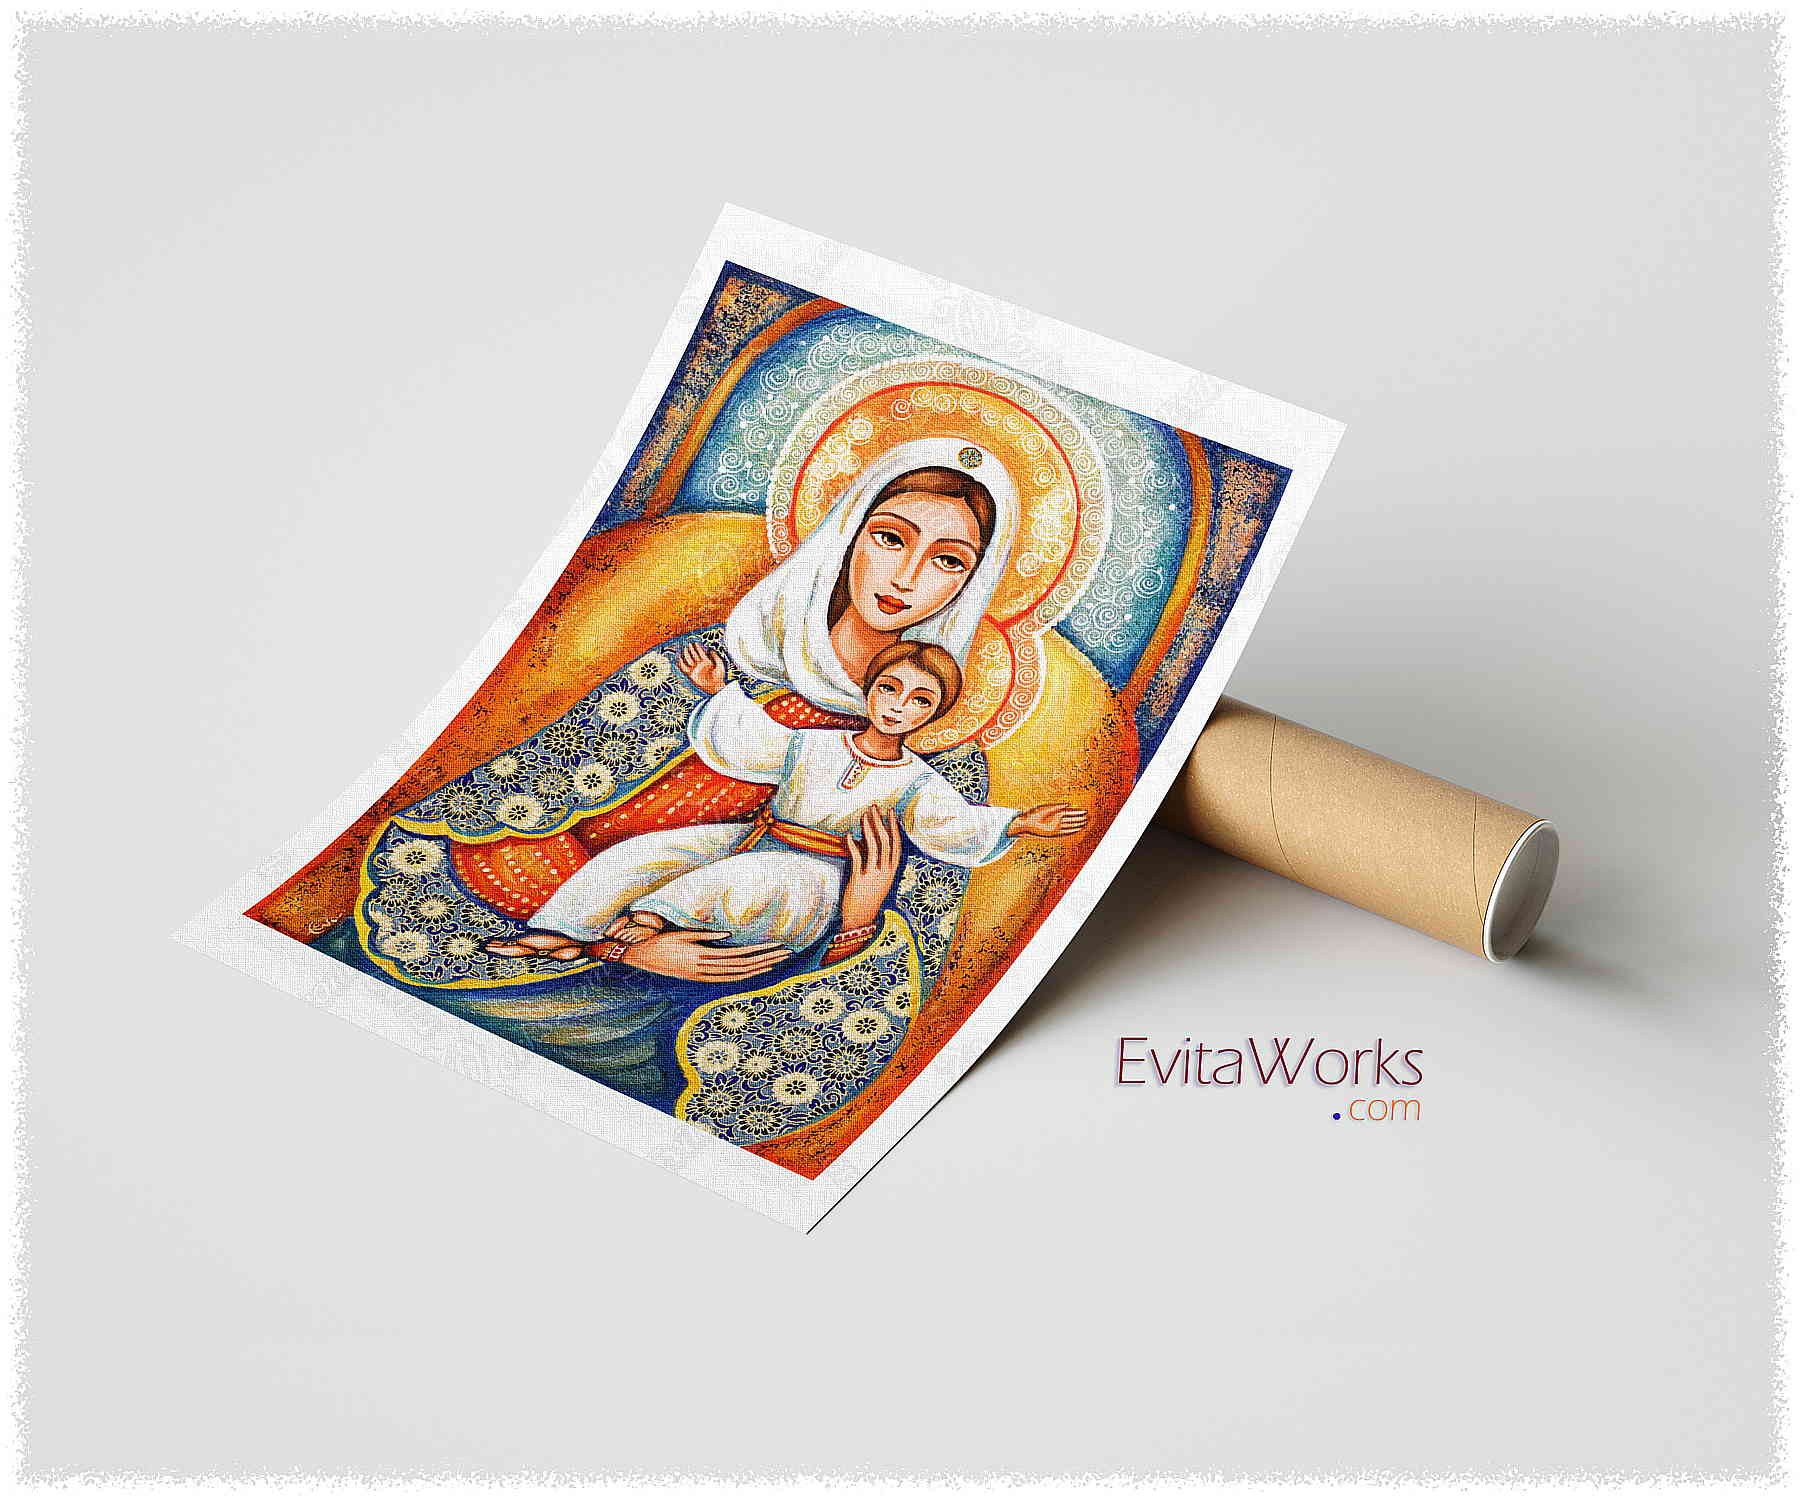 Hit to learn about "Heavenly Grace, Madonna and Child" on prints